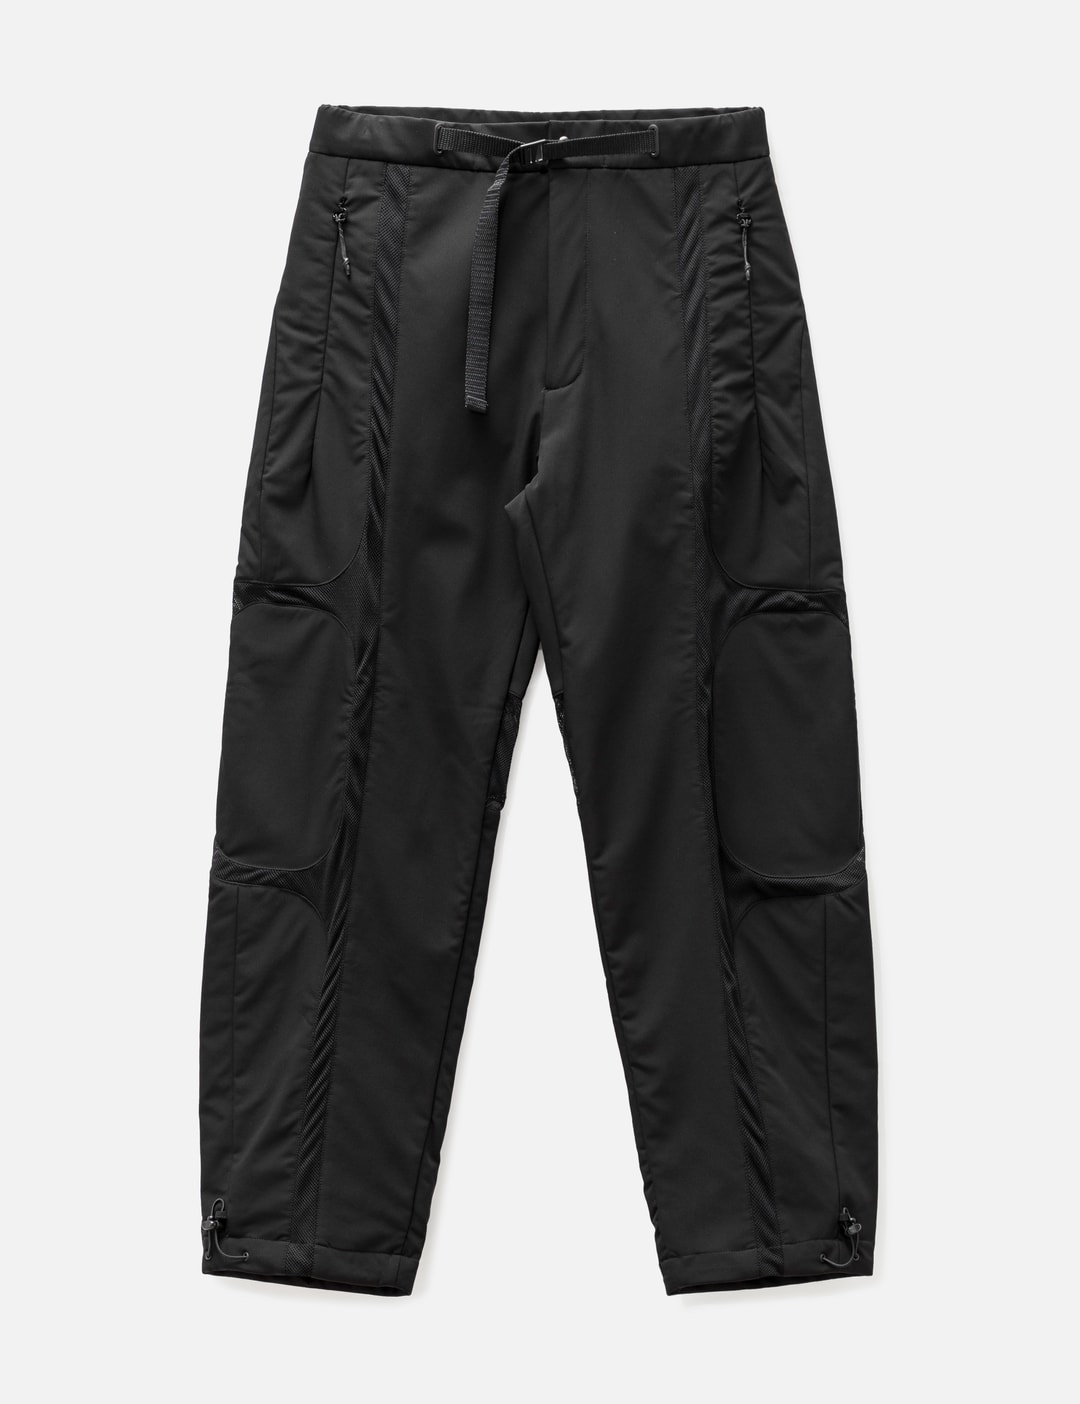 _J.L-A.L_ - Zephyr Pants | HBX - Globally Curated Fashion and Lifestyle ...